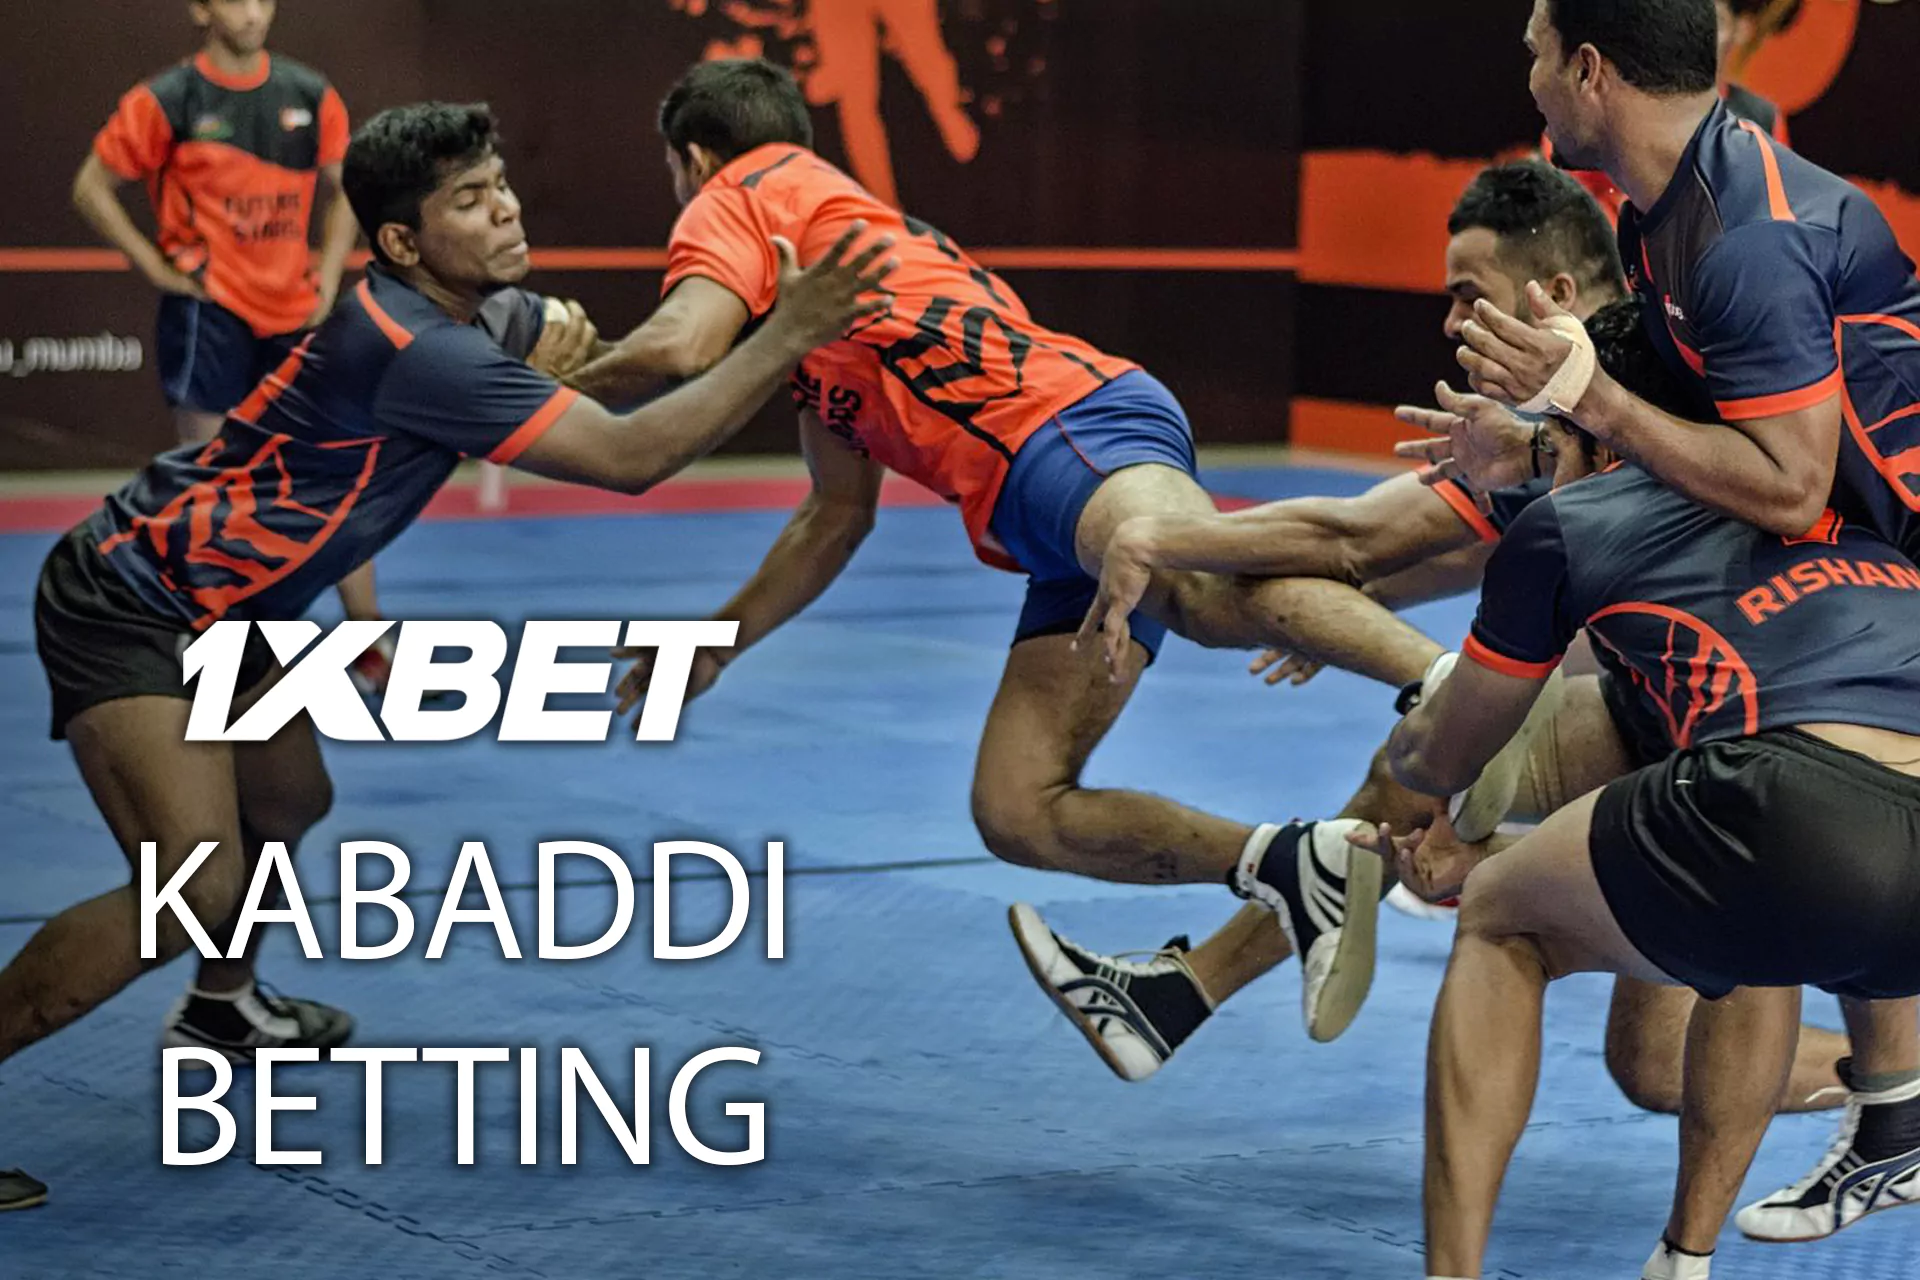 Bet on kabaddi legally on the official 1xBet website in India.